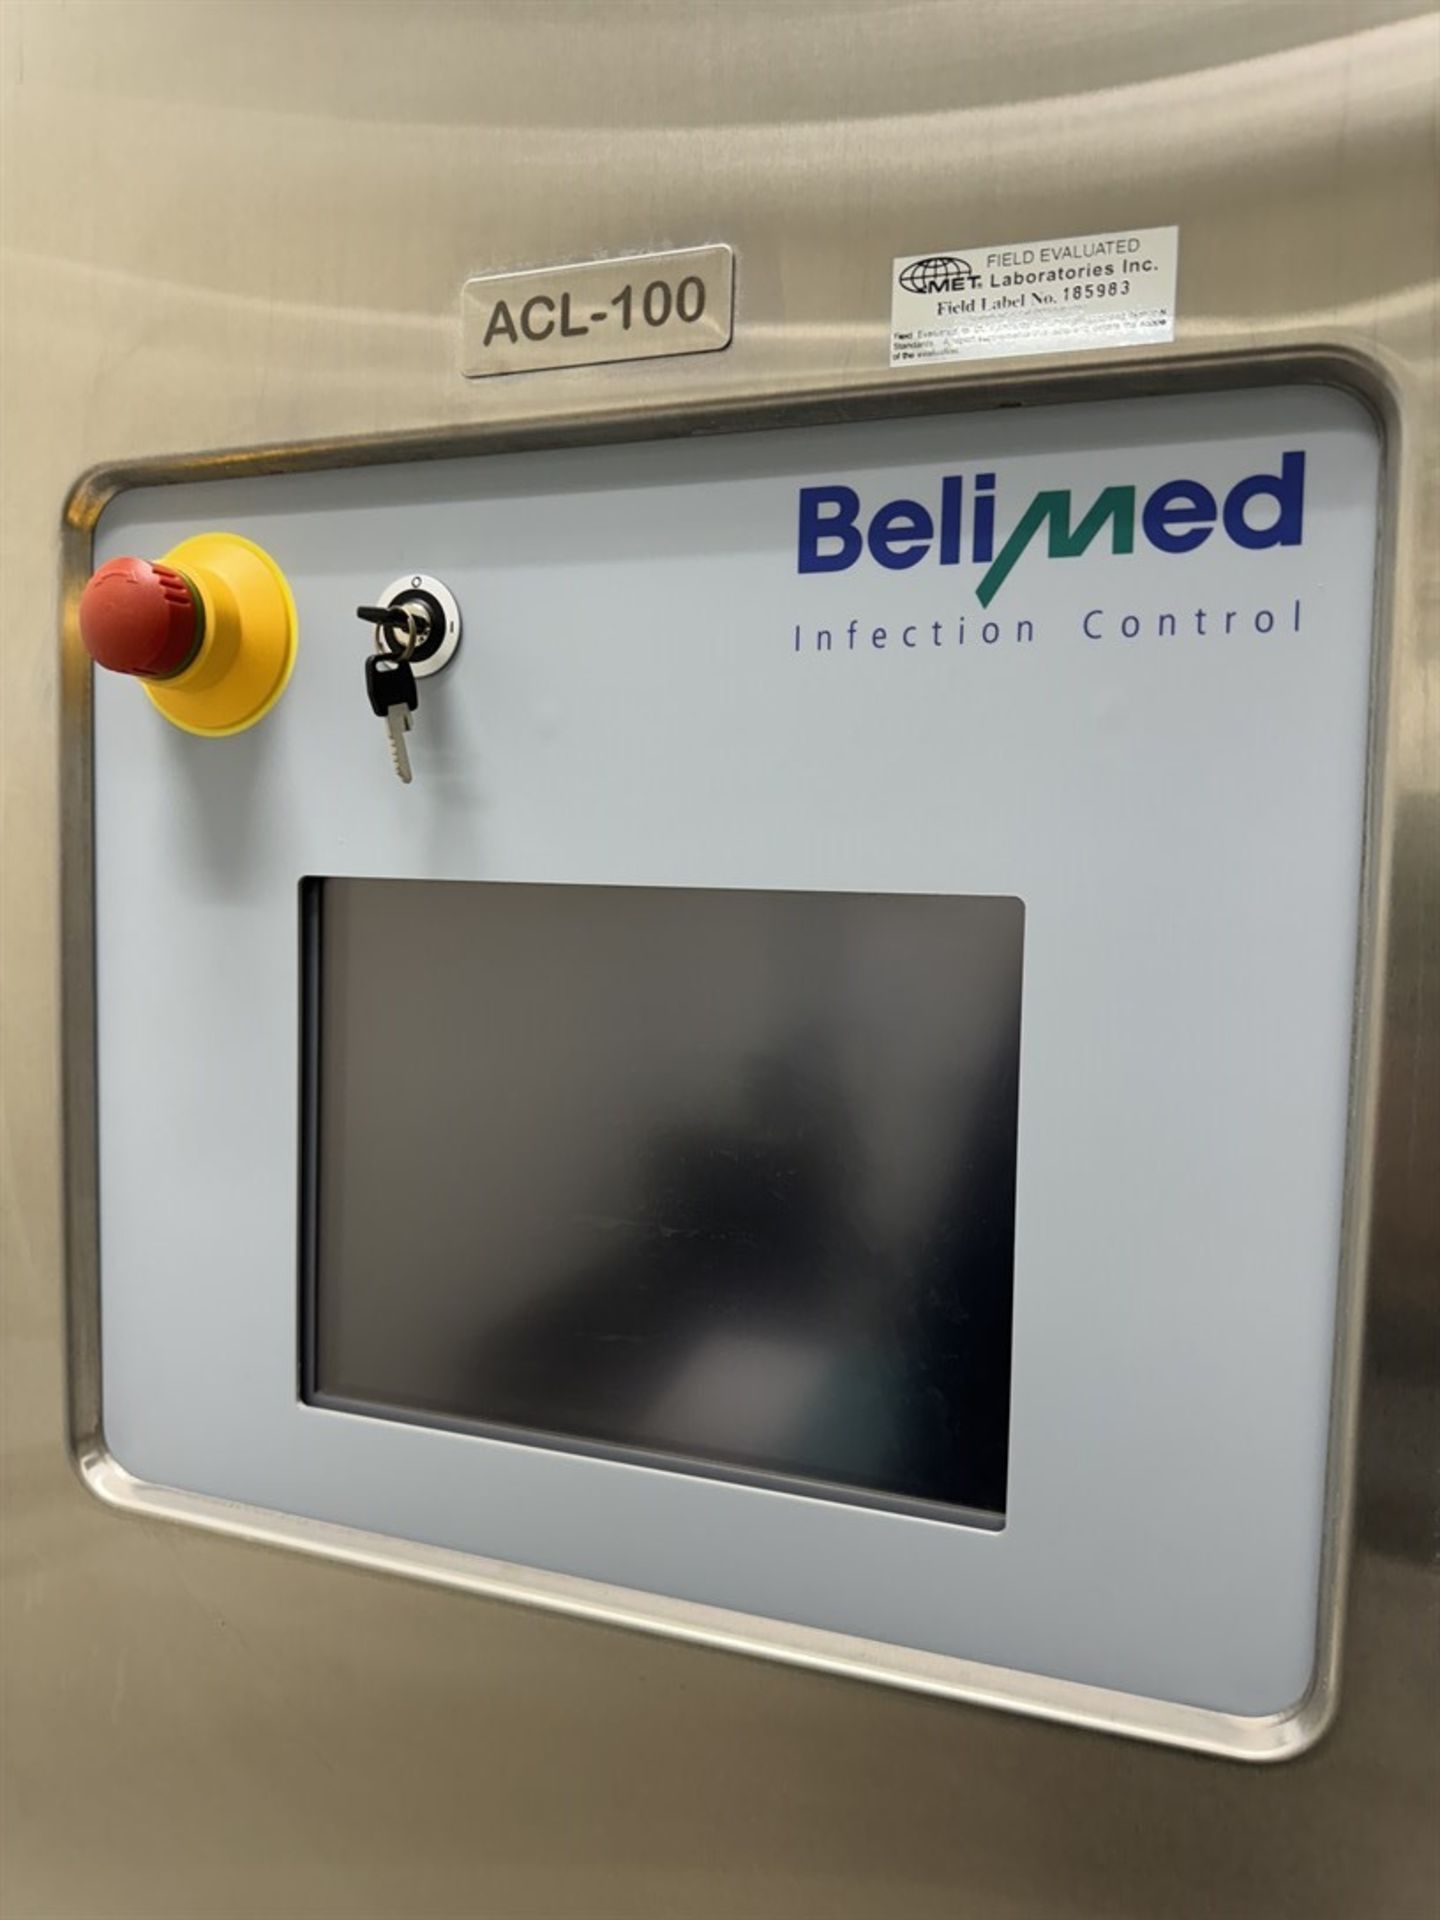 2014 BELIMED 6-6-9 HS2 Autoclave, s/n 750734, Belimed Infection Control, (2) Autoclave Loader Carts - Image 6 of 15